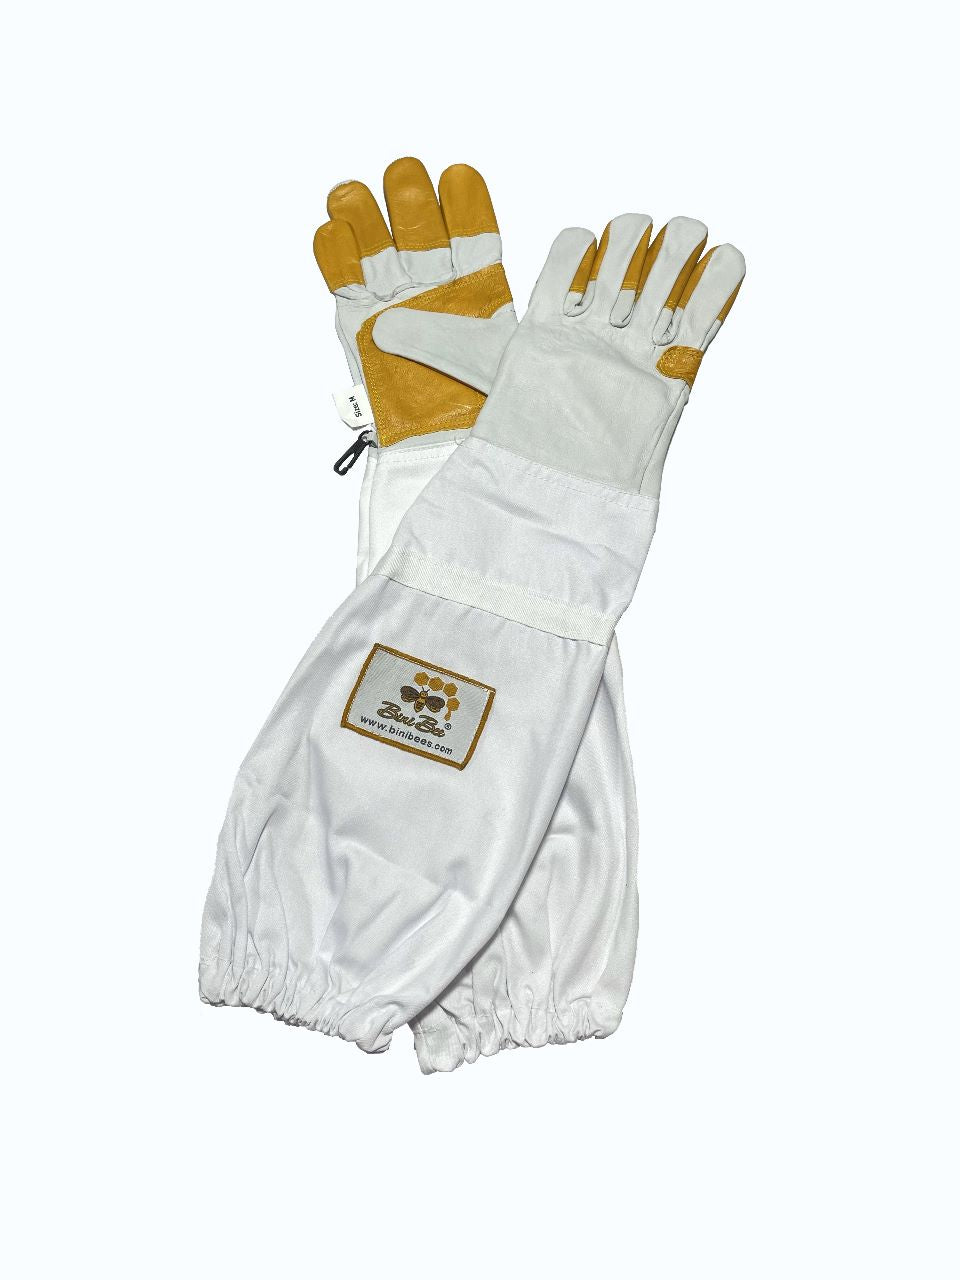 Rigger Double Palm Beekeeping Gloves Bini Bees